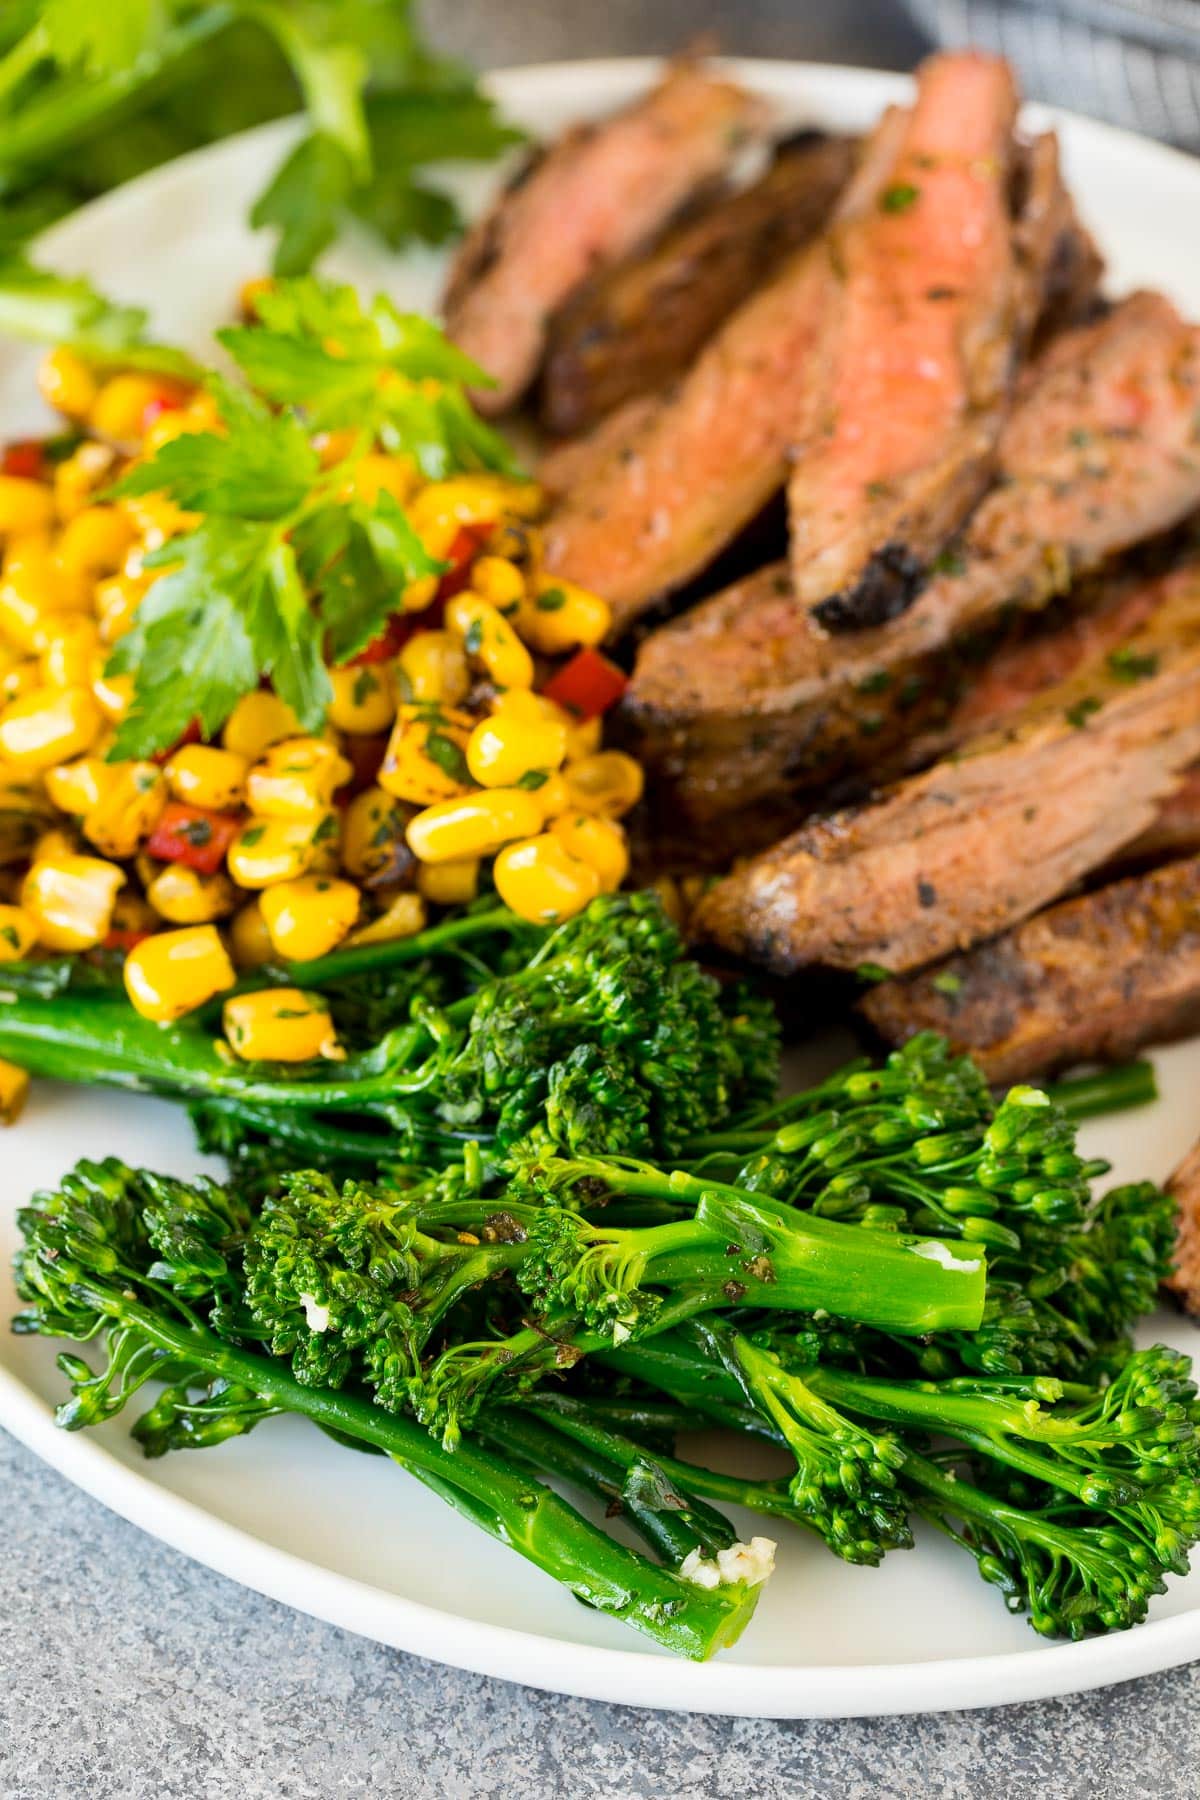 Cooked broccolini on a plate with steak and corn.